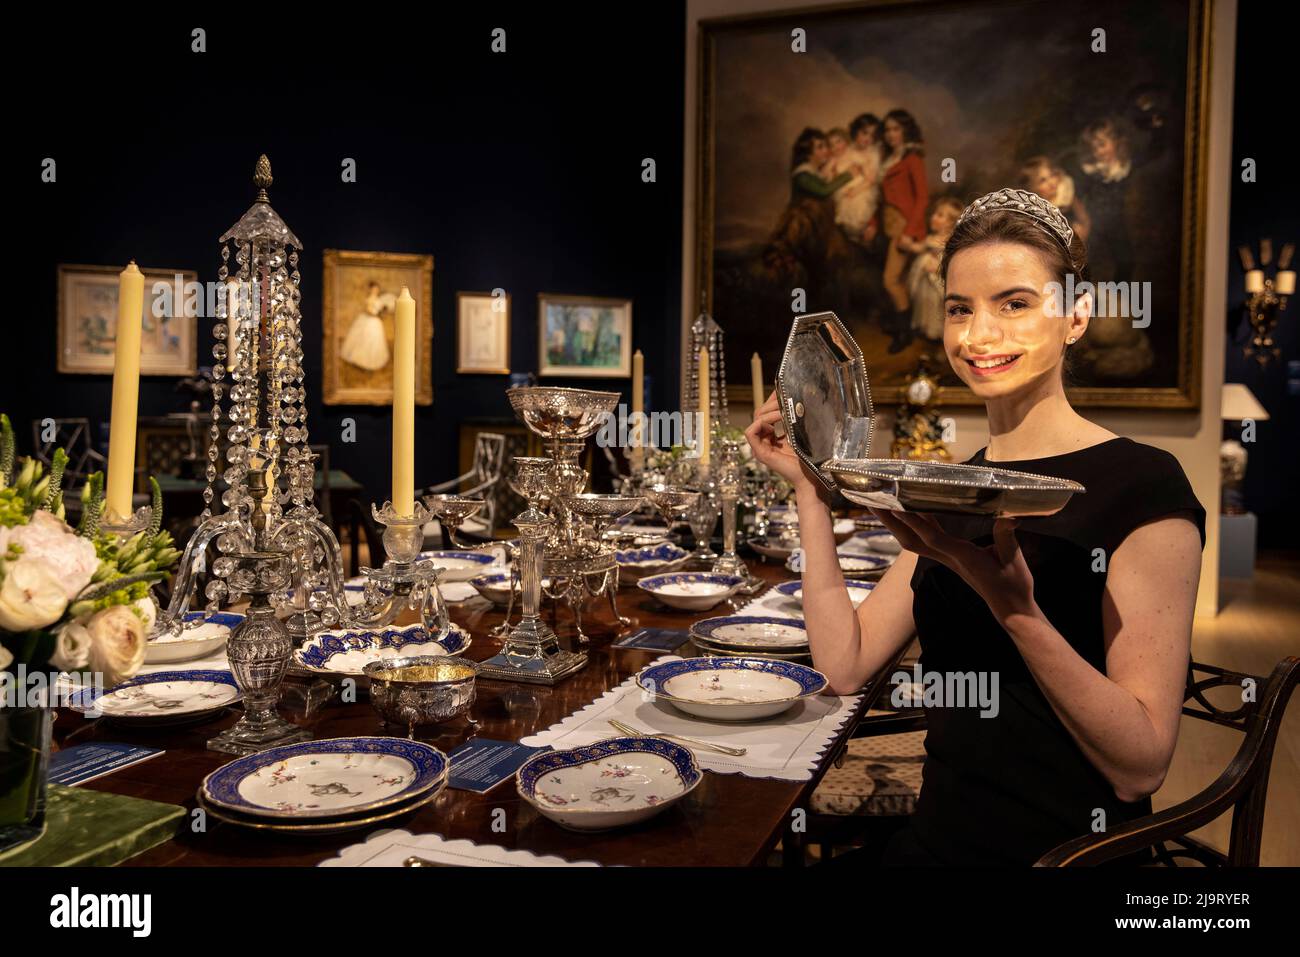 Christies Collection of The Late Lord And Lday Swaythling Picture shows Michaela Suhl, jewelry specialist amongst some of the antique furniture. Stock Photo